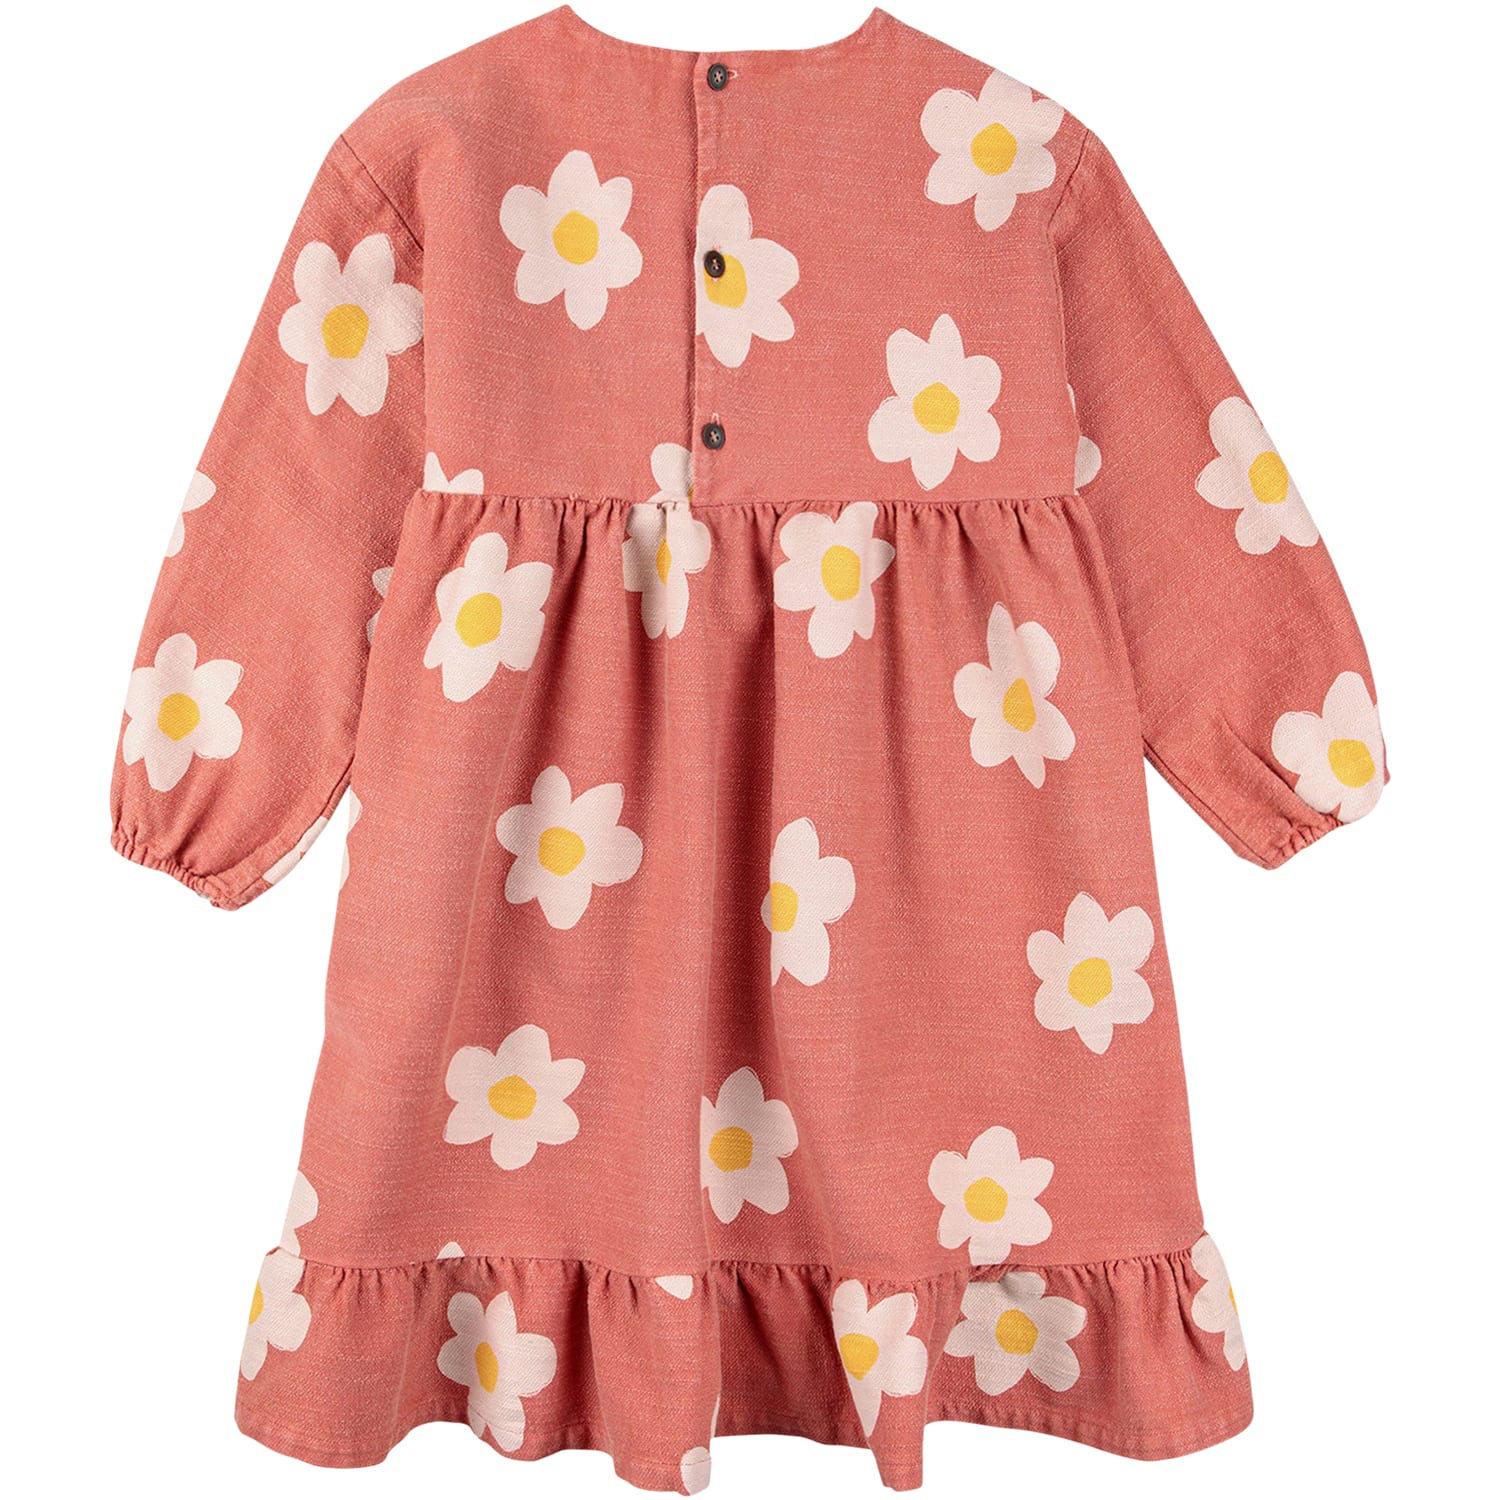 Shop Bobo Choses Pink Dress For Girl With Daisies